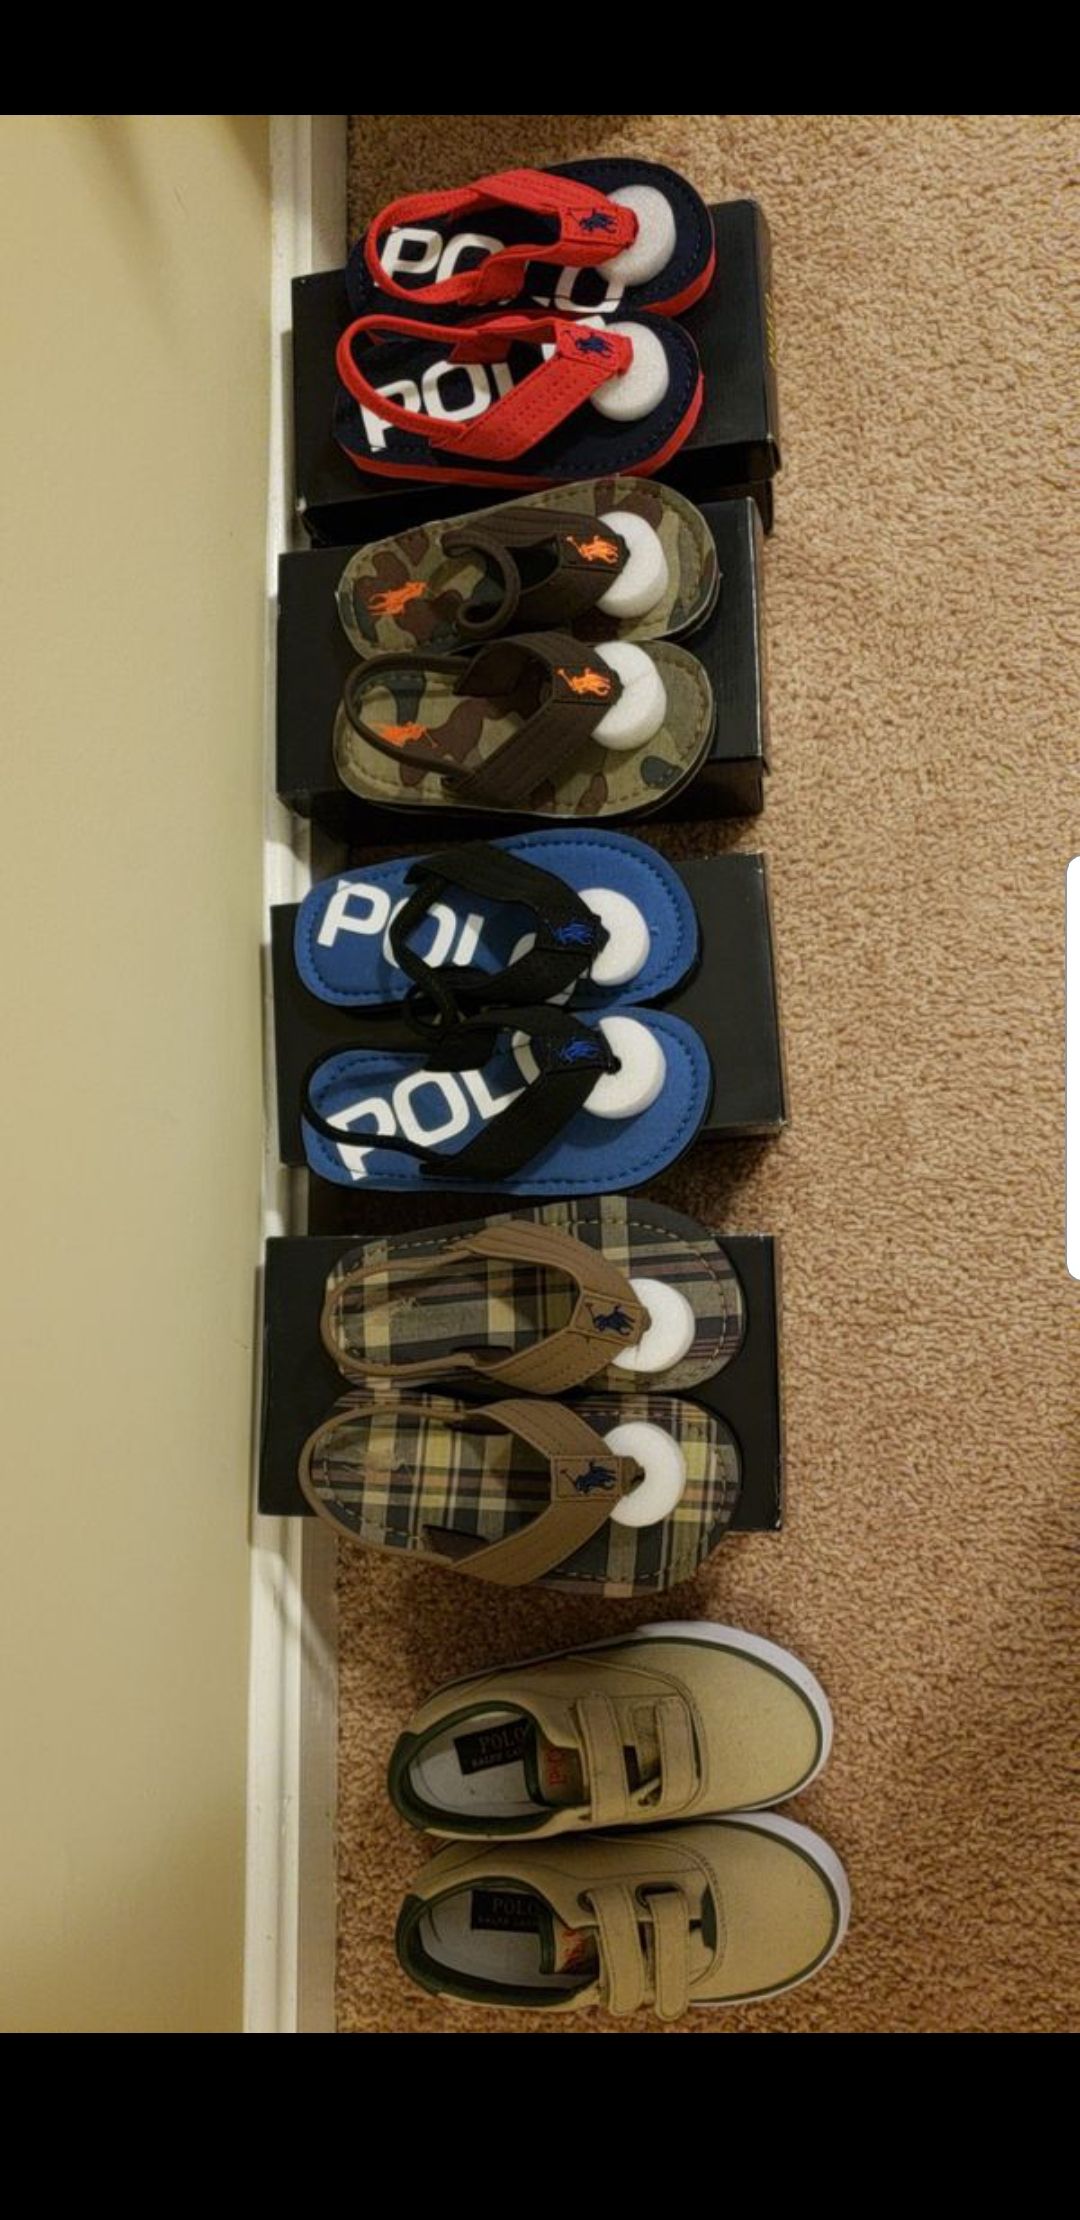 Polo Ralph Lauren toddler size 8,9 and 10